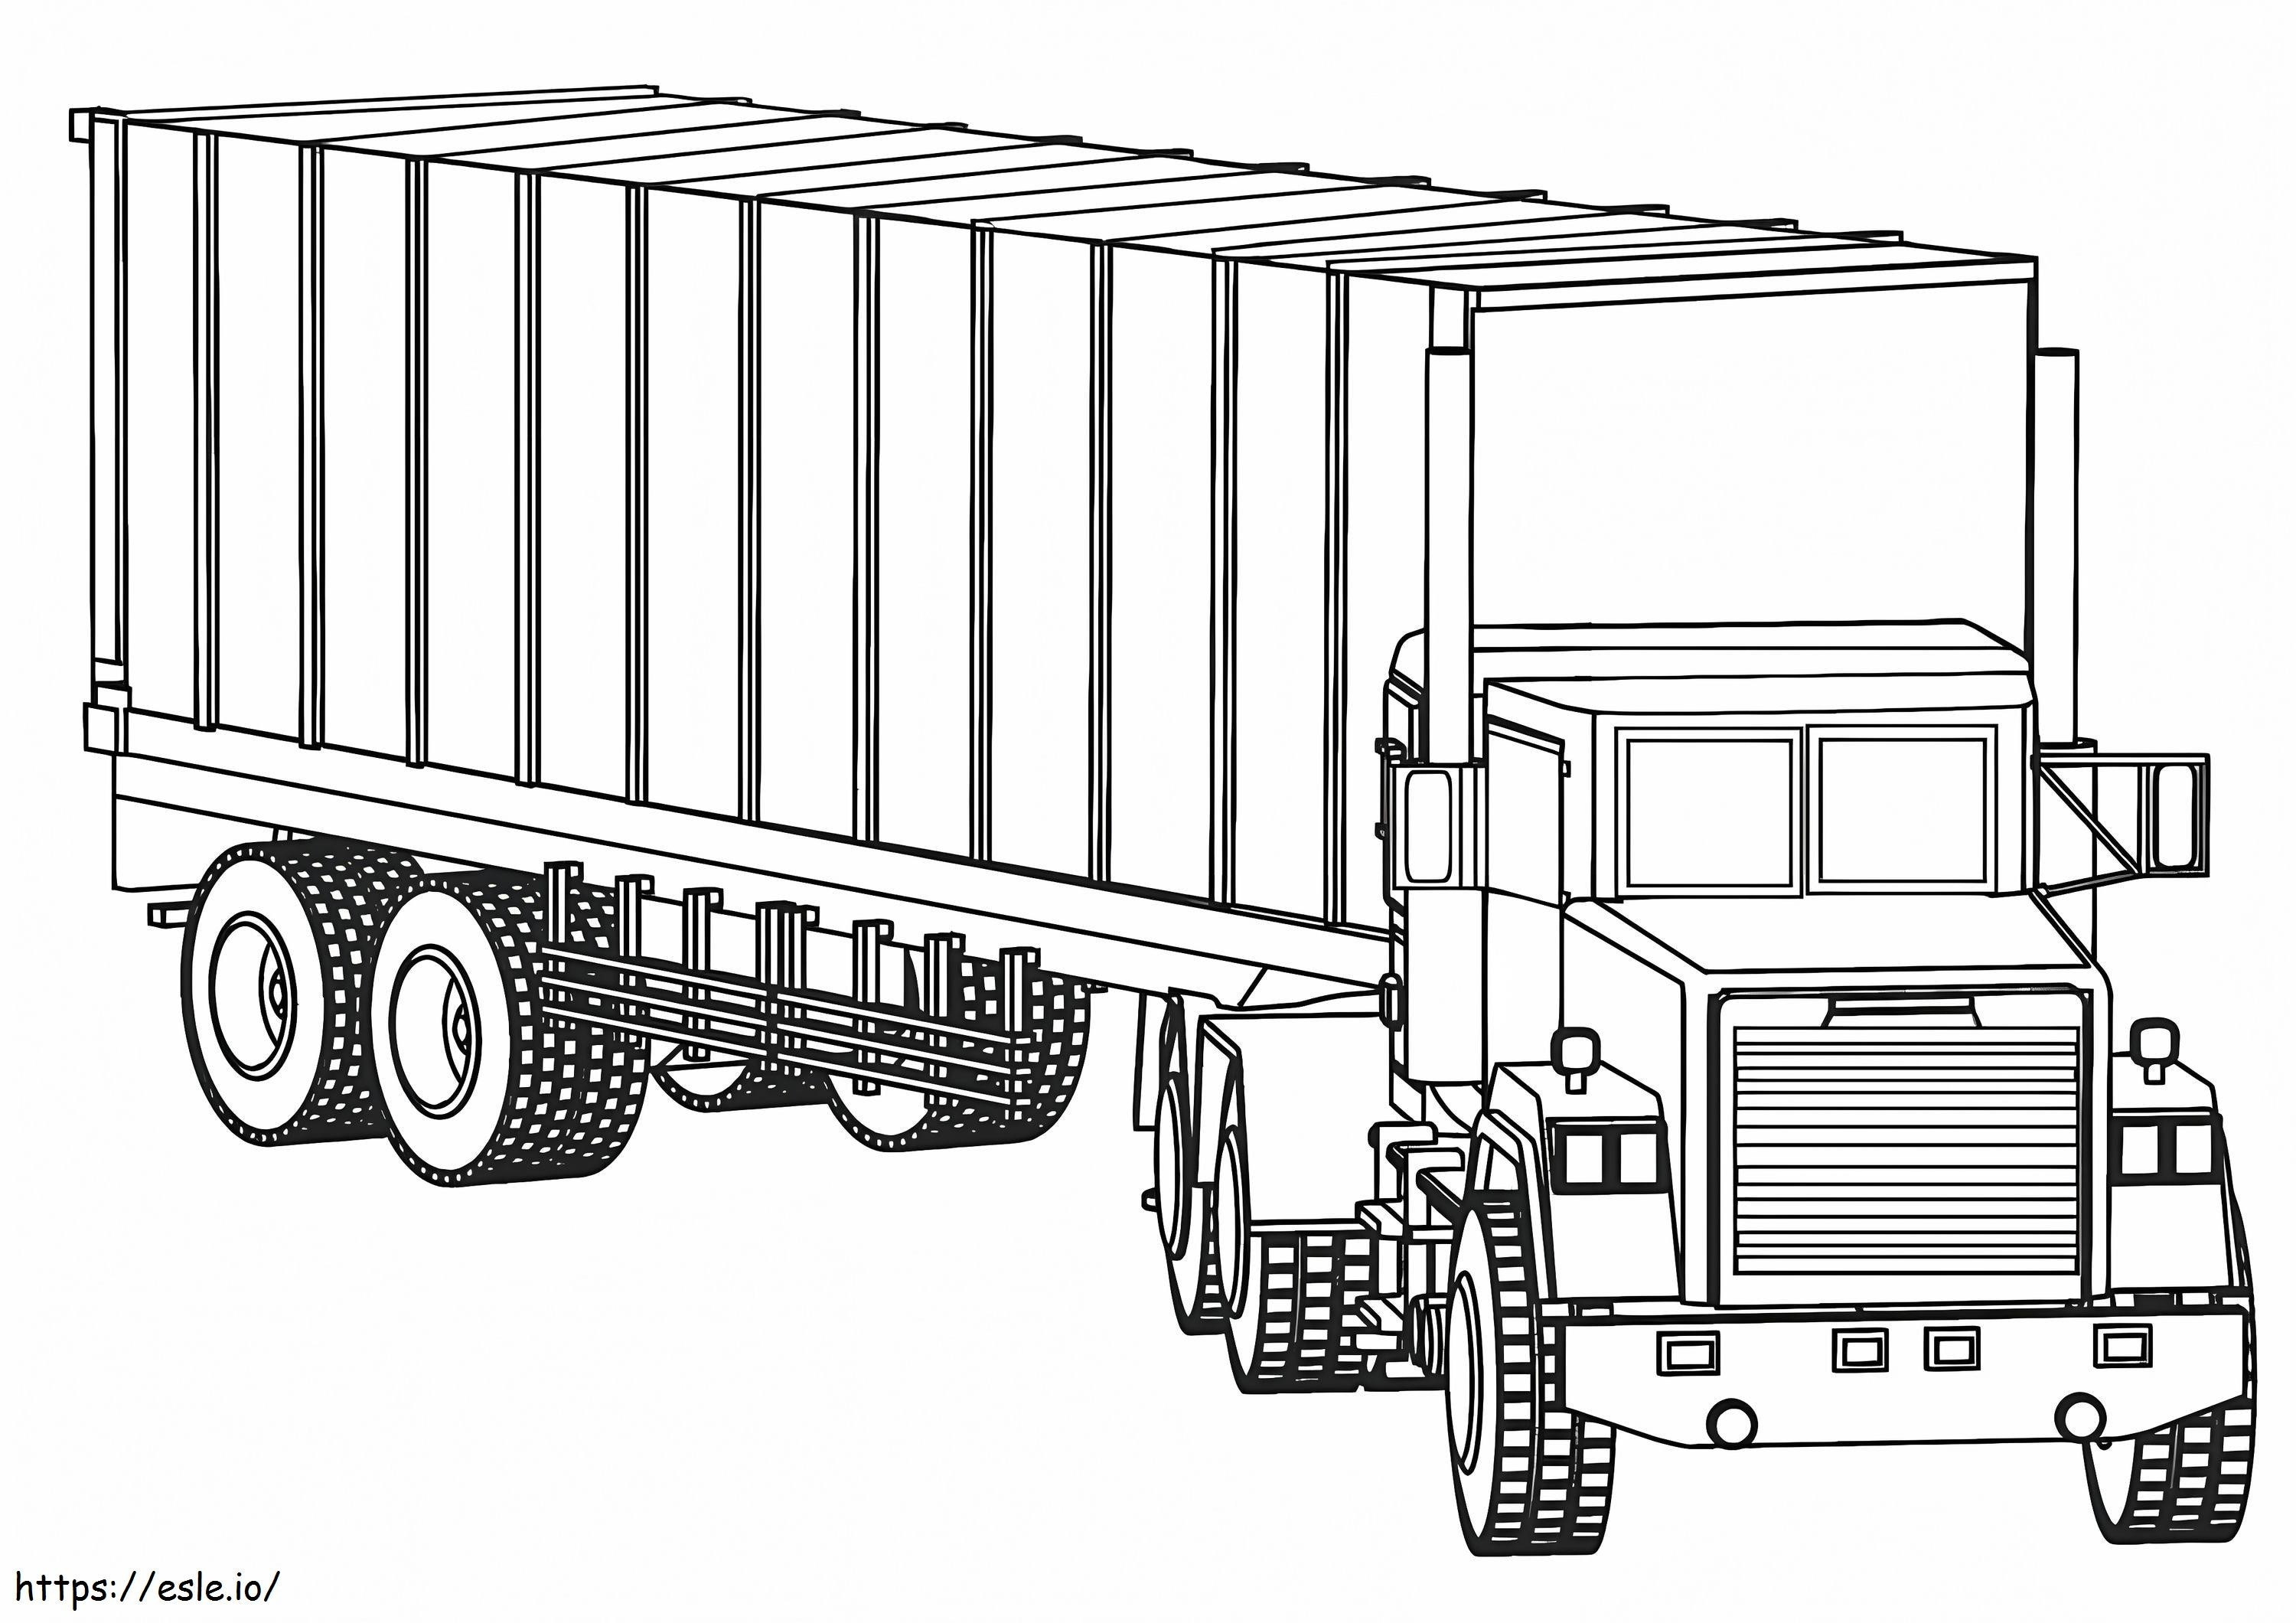 Basic Truck coloring page